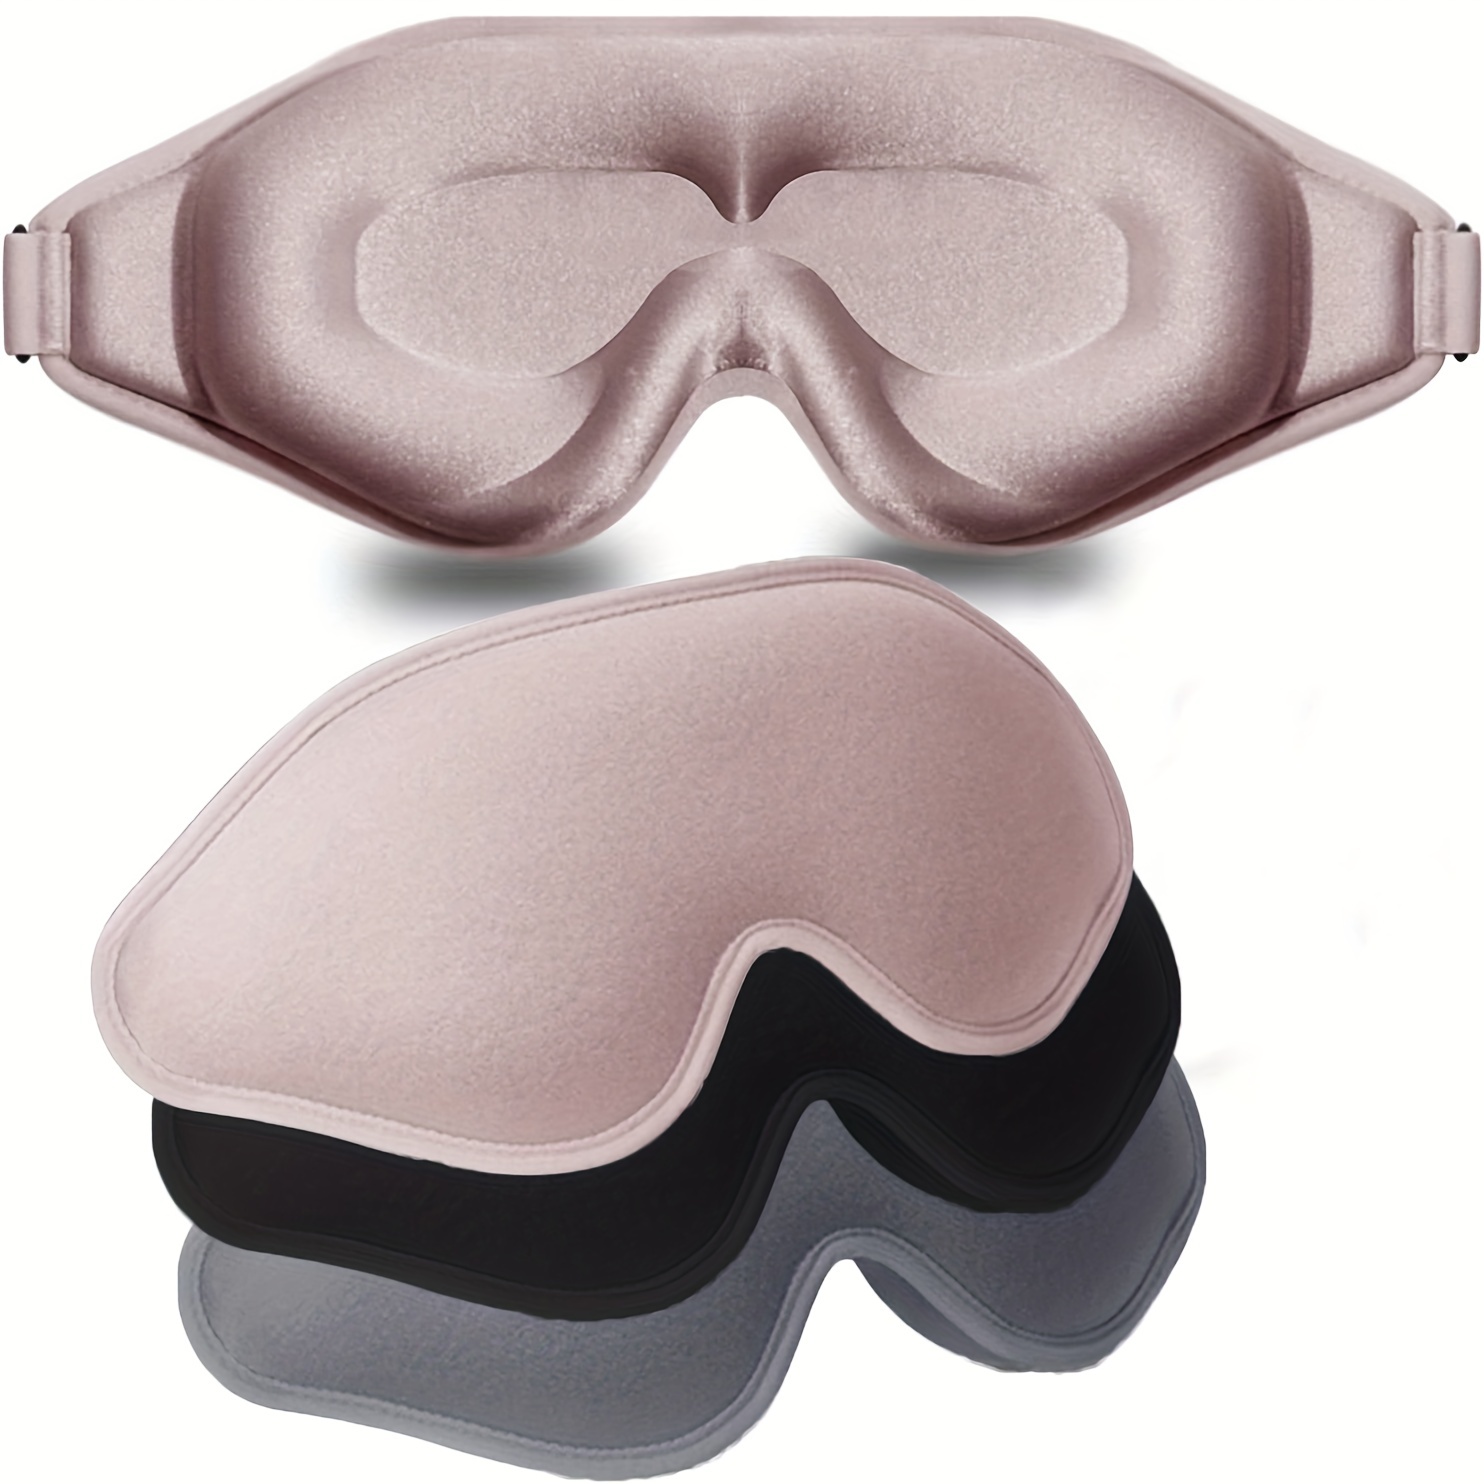  2 Pieces Cute Sleep Eye Masks for Kids Silk Cute Lightweight  Adjustable Eyeshade Mask Satin Night Eyeshade Covers with 2 Pieces Storage  Bag(Pink, Gray,Over 12 Years) : Health & Household